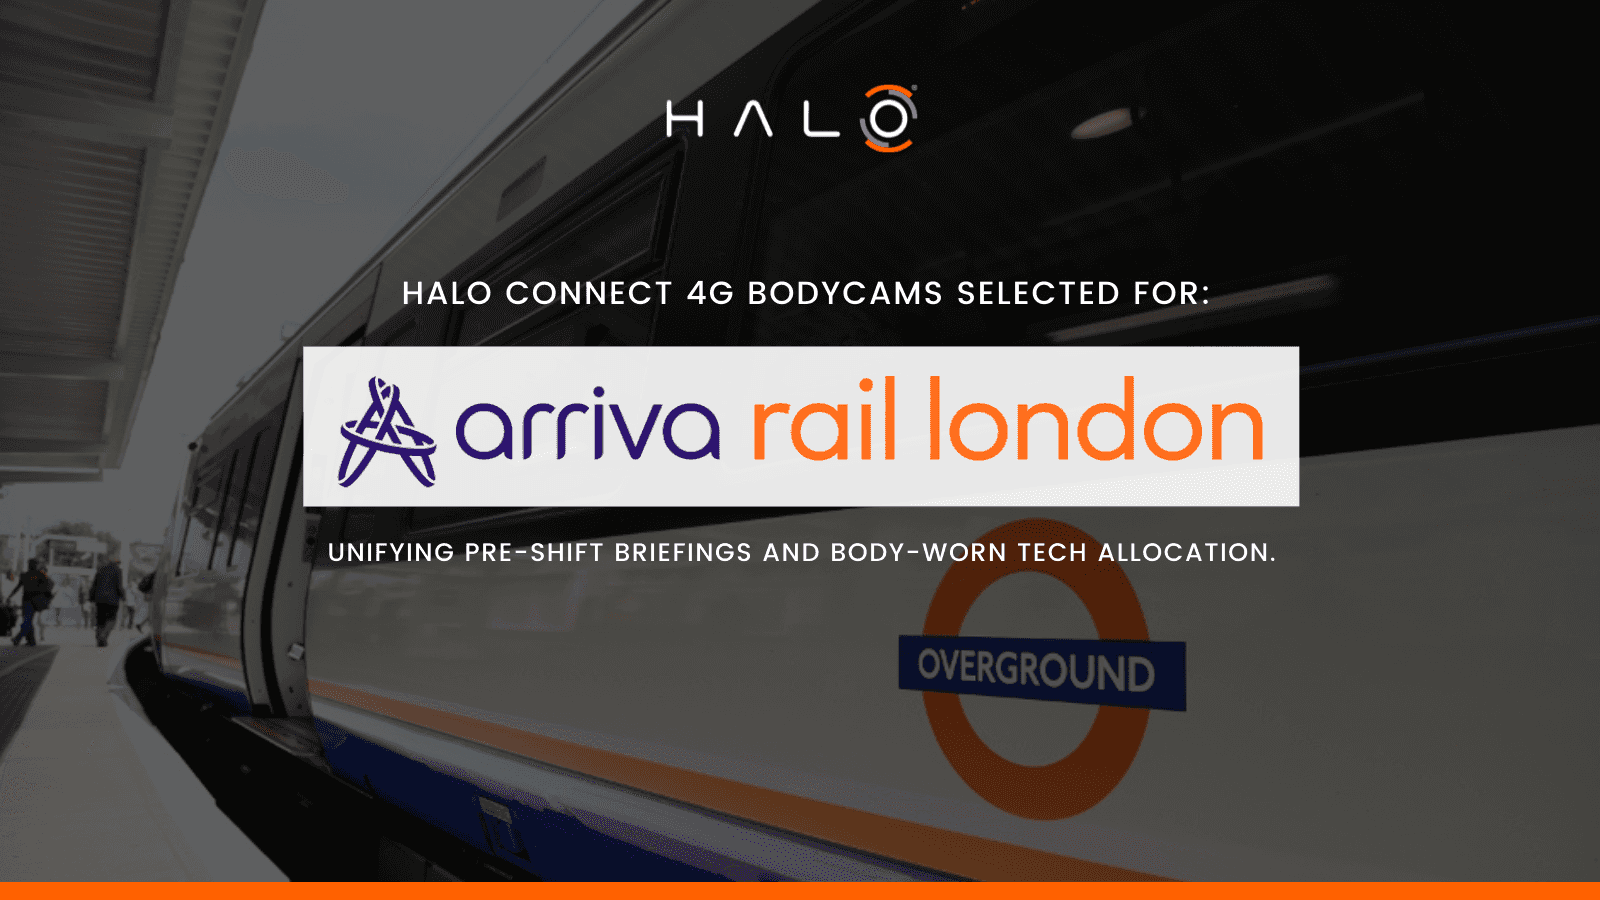 HALO CONNECT BODYCAMS DEPLOYED BY ARRIVA RAIL LONDON